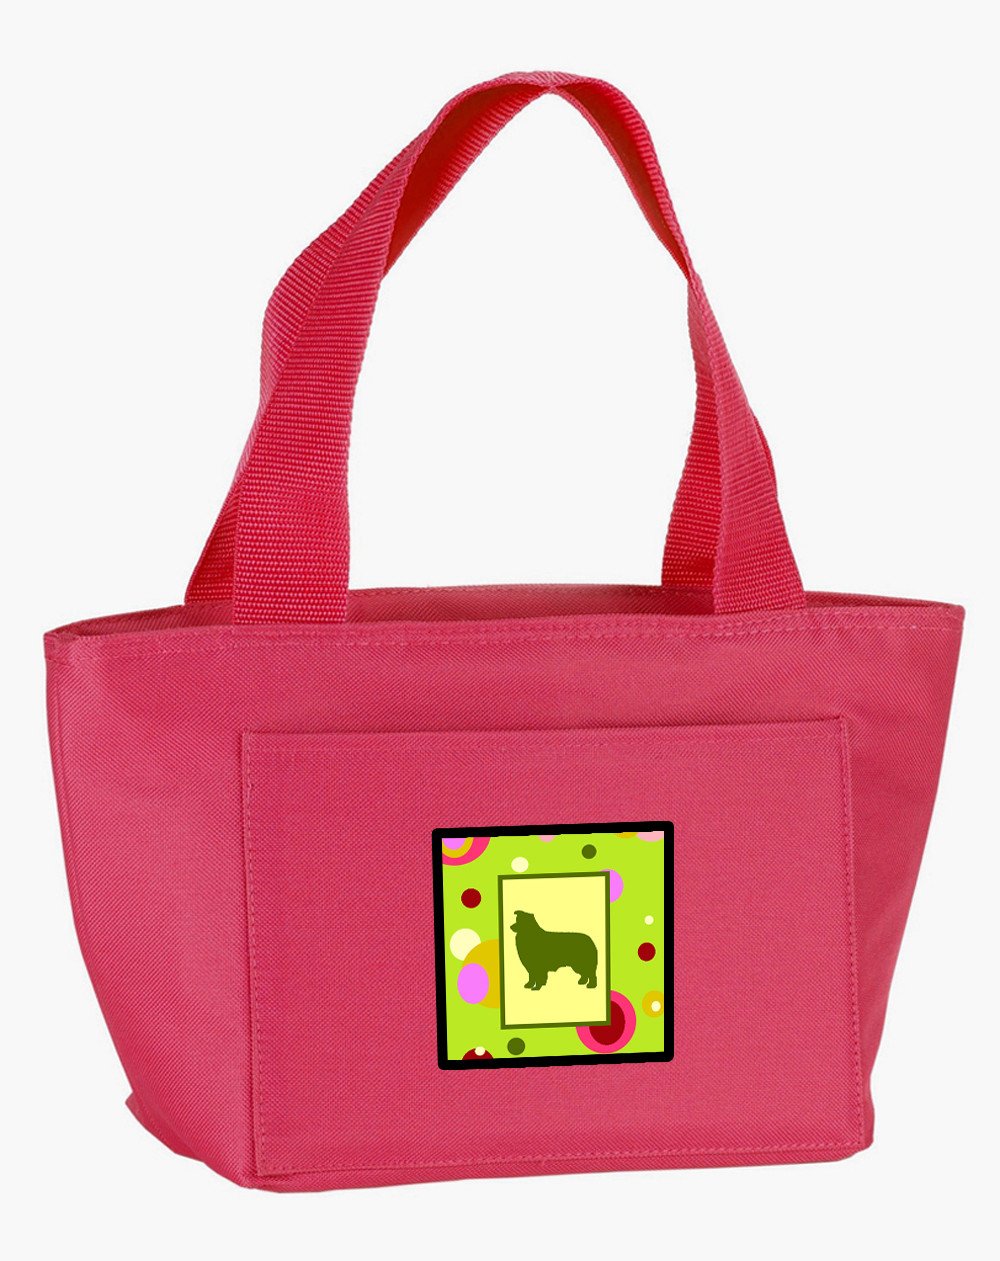 Lime Green Dots Border Collie Lunch Bag CK1119PK-8808 by Caroline's Treasures